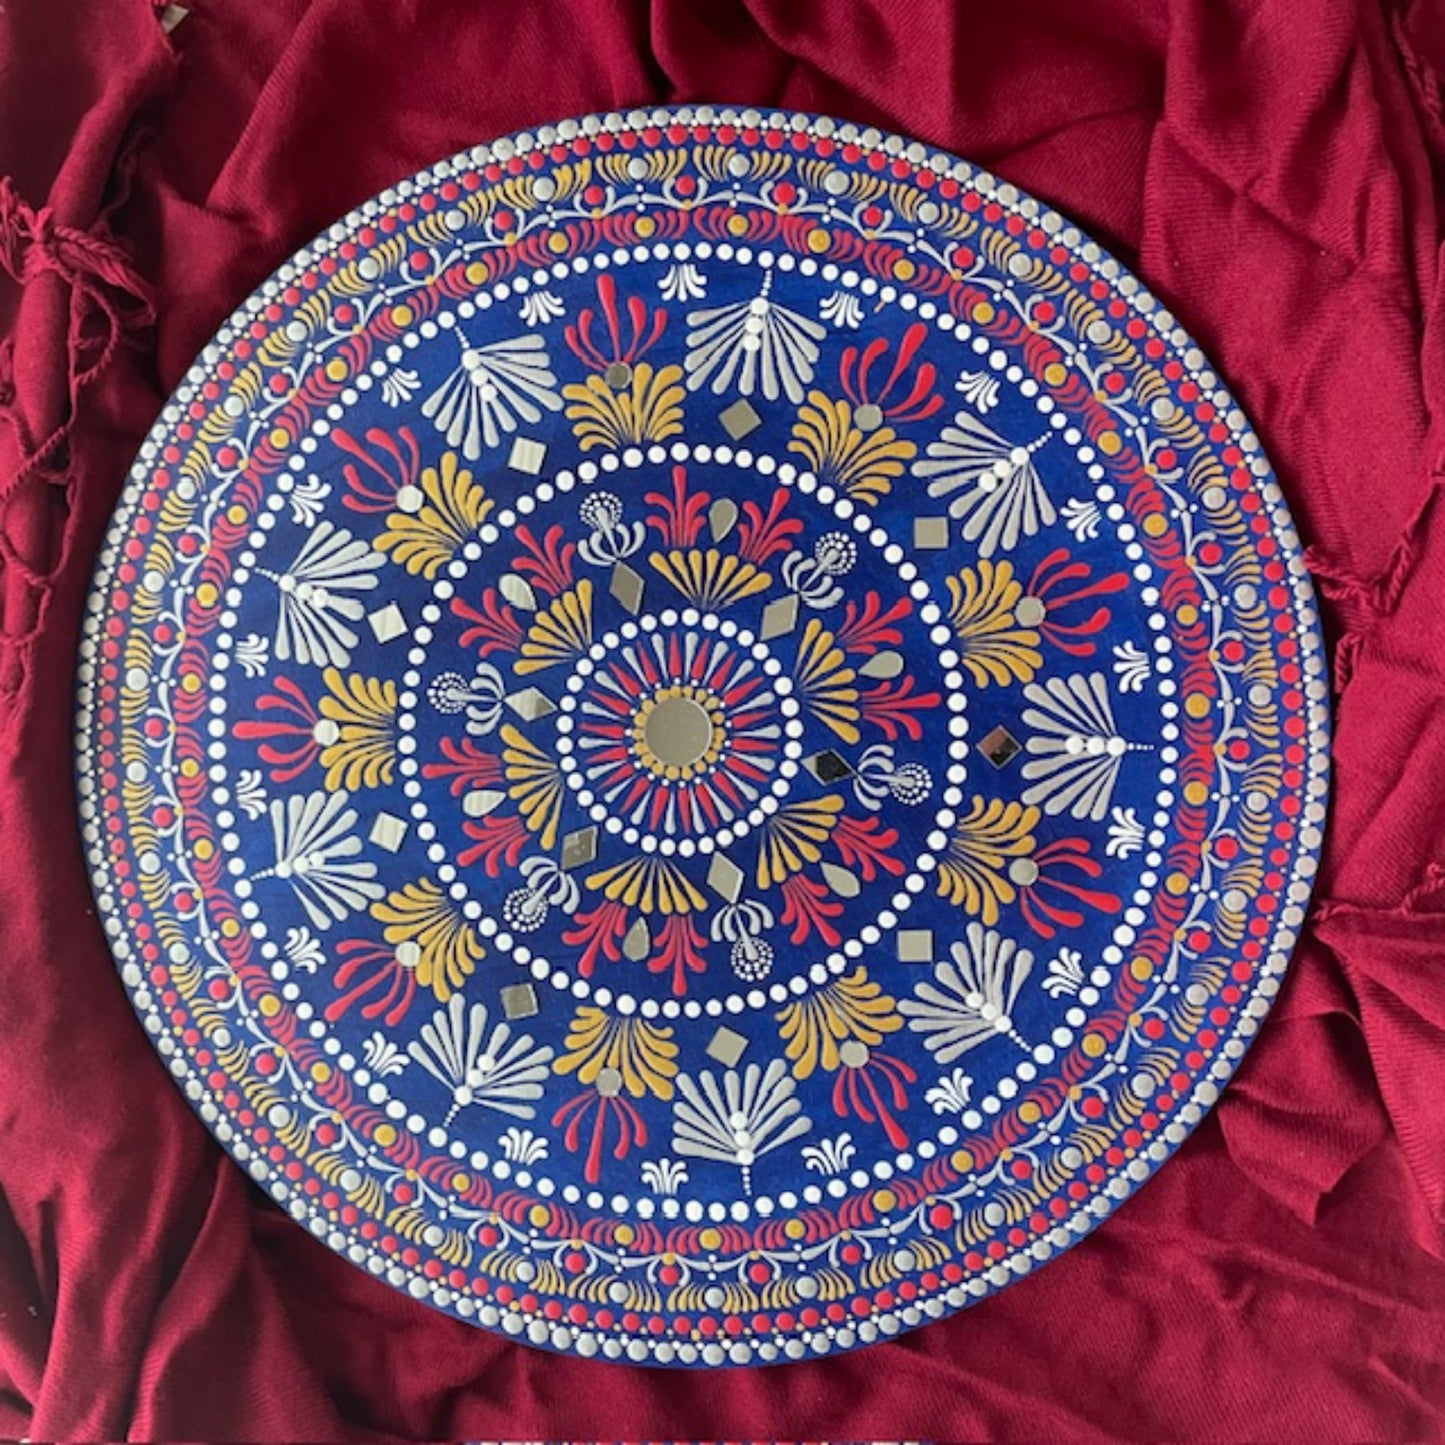 Mandala with Mirrors Dot Art with Shades of Blue Gold Red White Colors Handmade Home Office Wall Decor